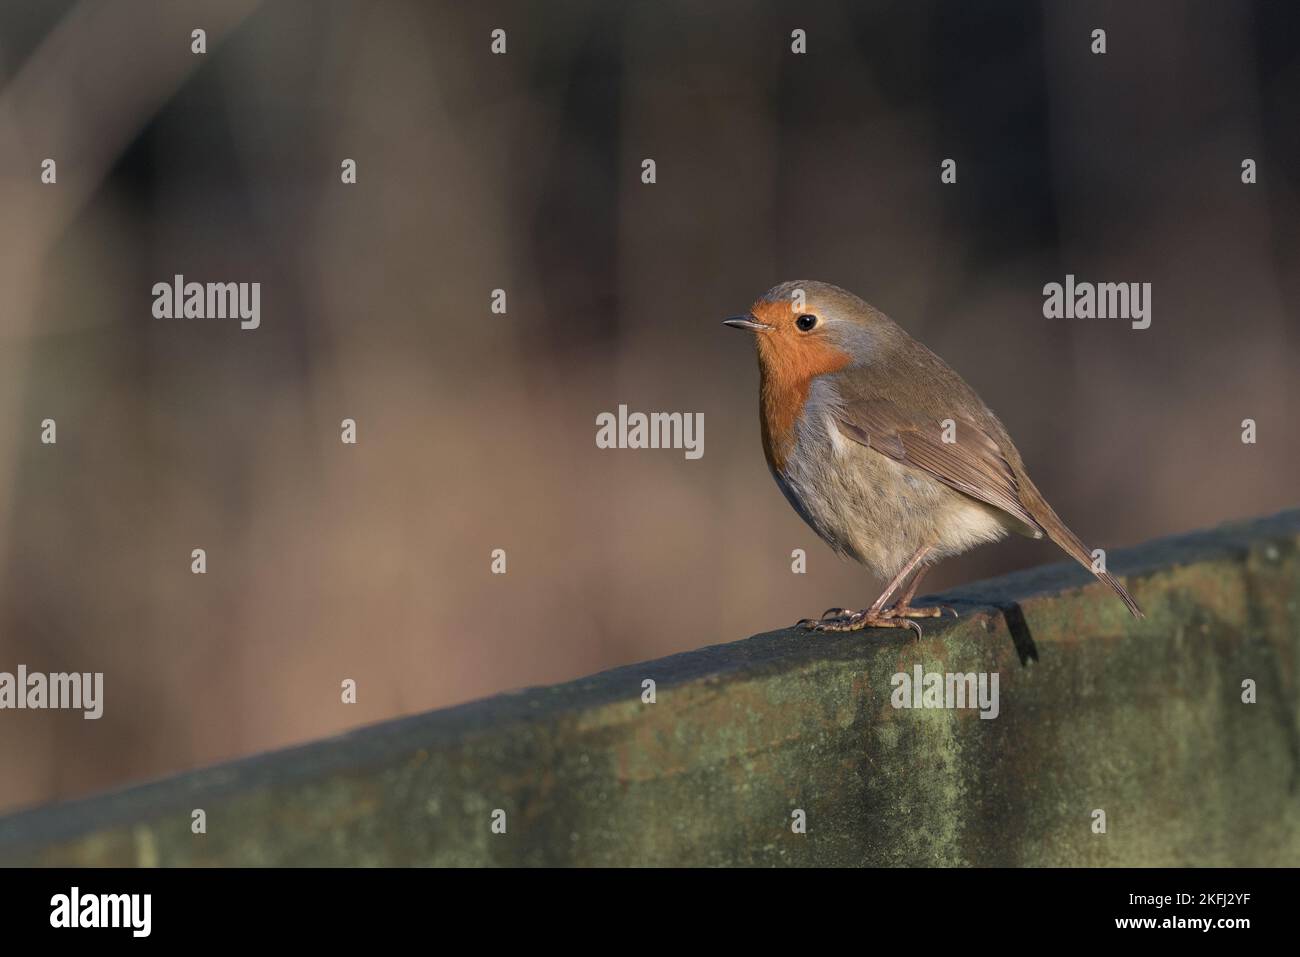 Beautiful robin perched on a wooden fence beam. brown blurred background. Latin name Erithacus rubecula Stock Photo